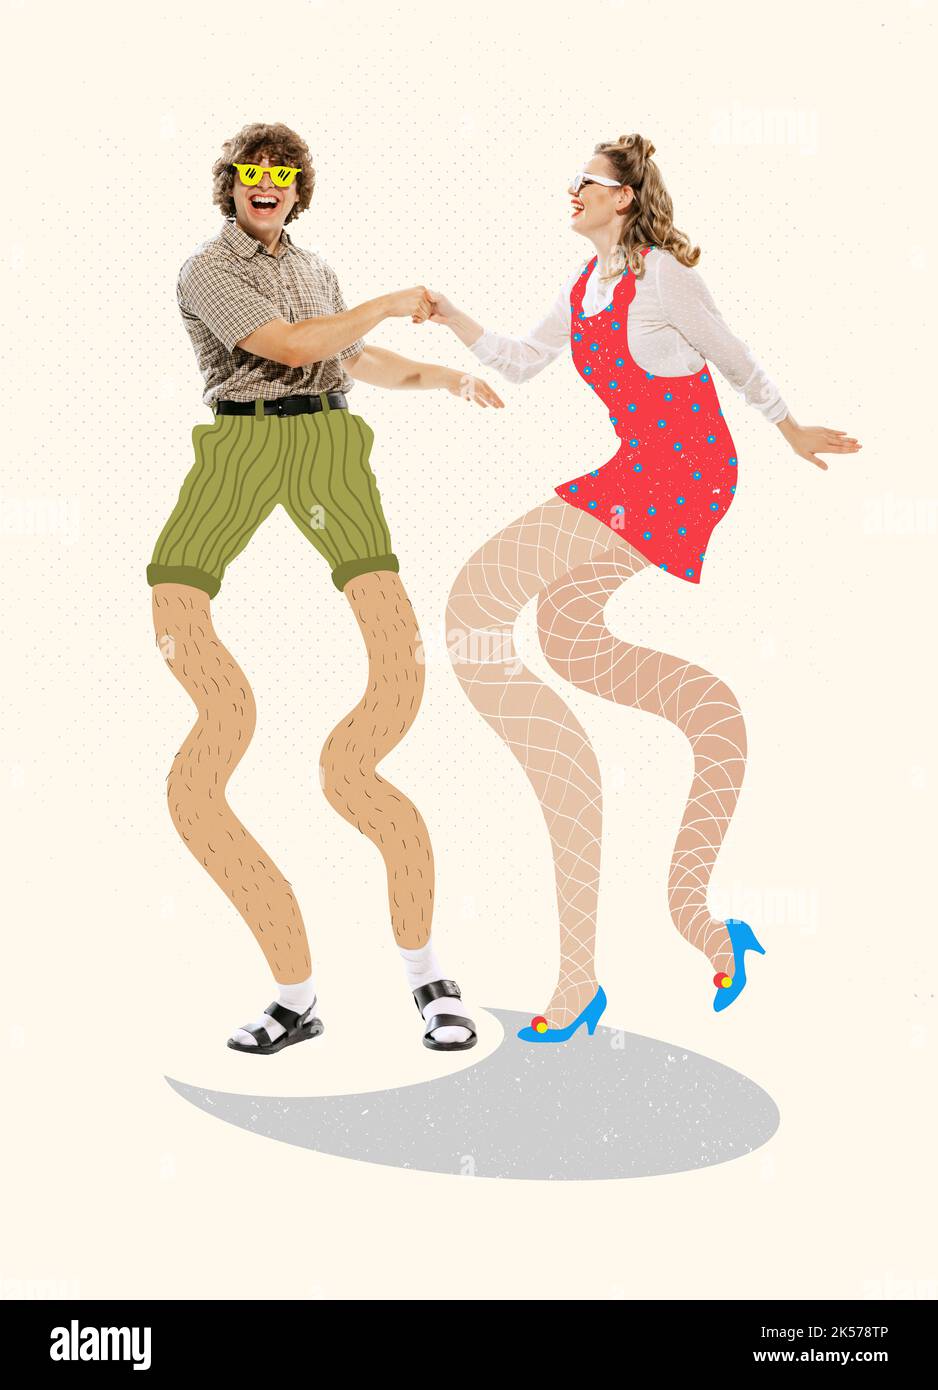 Contemporary art collage. Two cheerful people, man and woman, in summer outfit dancing, having fun. Holiday party Stock Photo